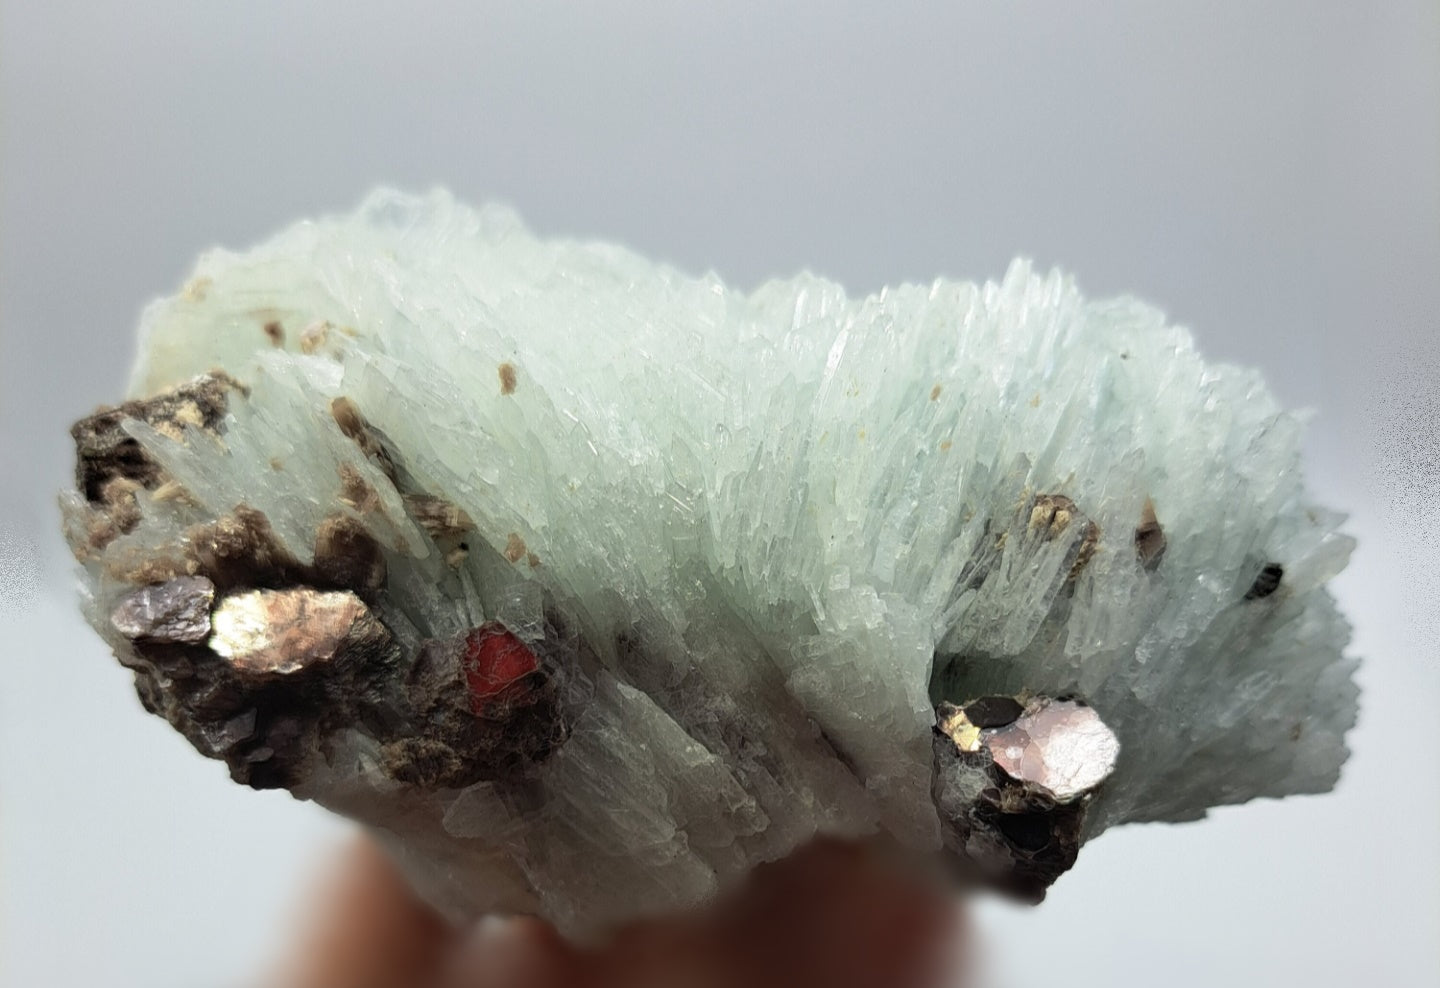 EXTREMELY RARE Huge Cleavelandite w/Mica Amazing Crystal for Transition & Intuition